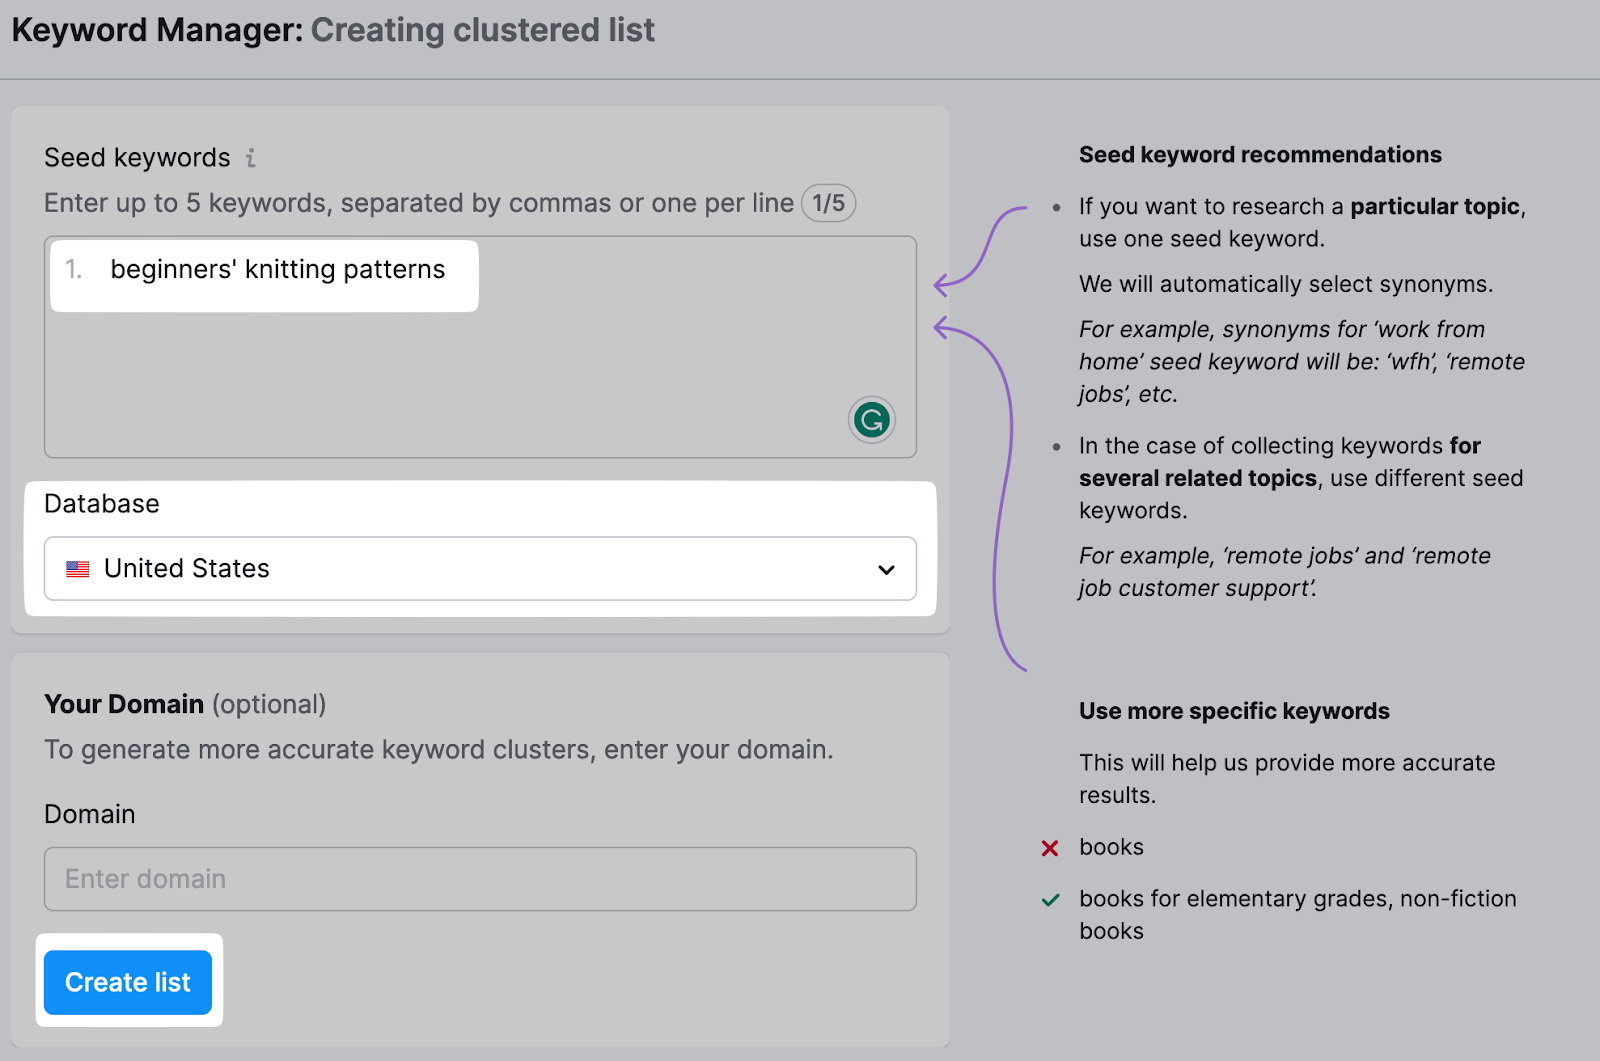 Steps in creating a clustered list in Keyword Manager